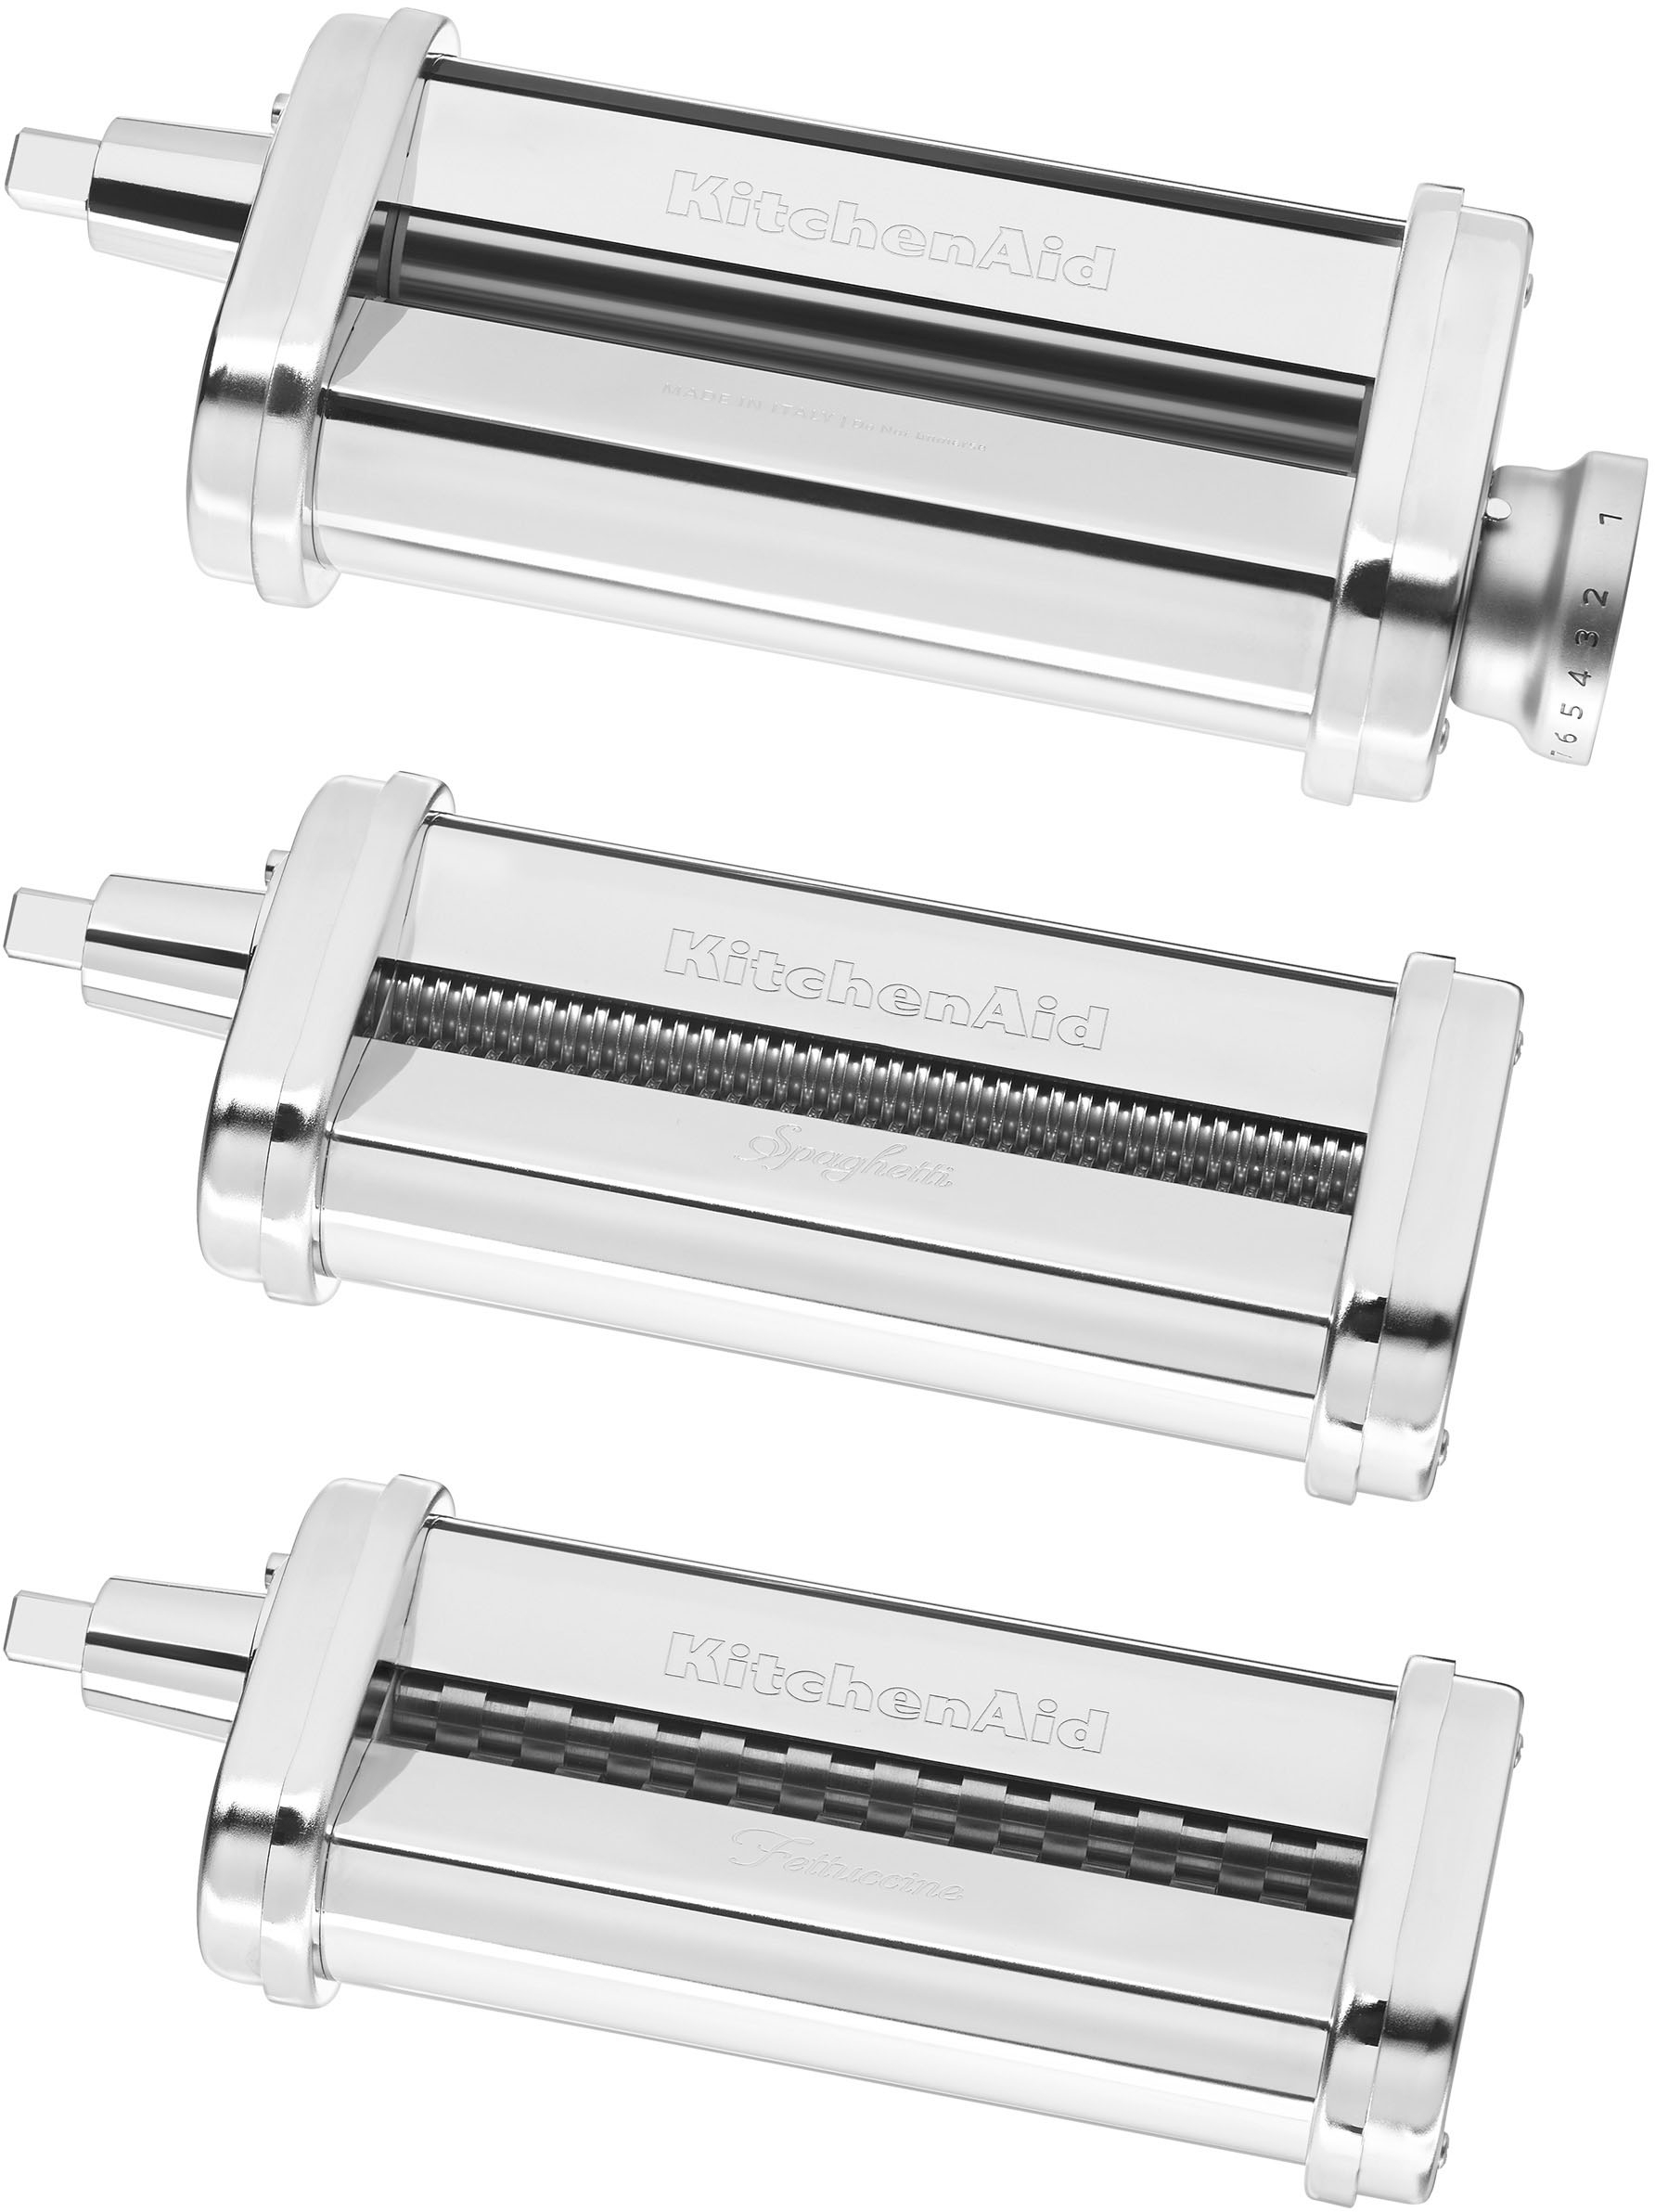 Angle View: KSMPRA Pasta Roller Attachments for Most KitchenAid Stand Mixers - Stainless Steel